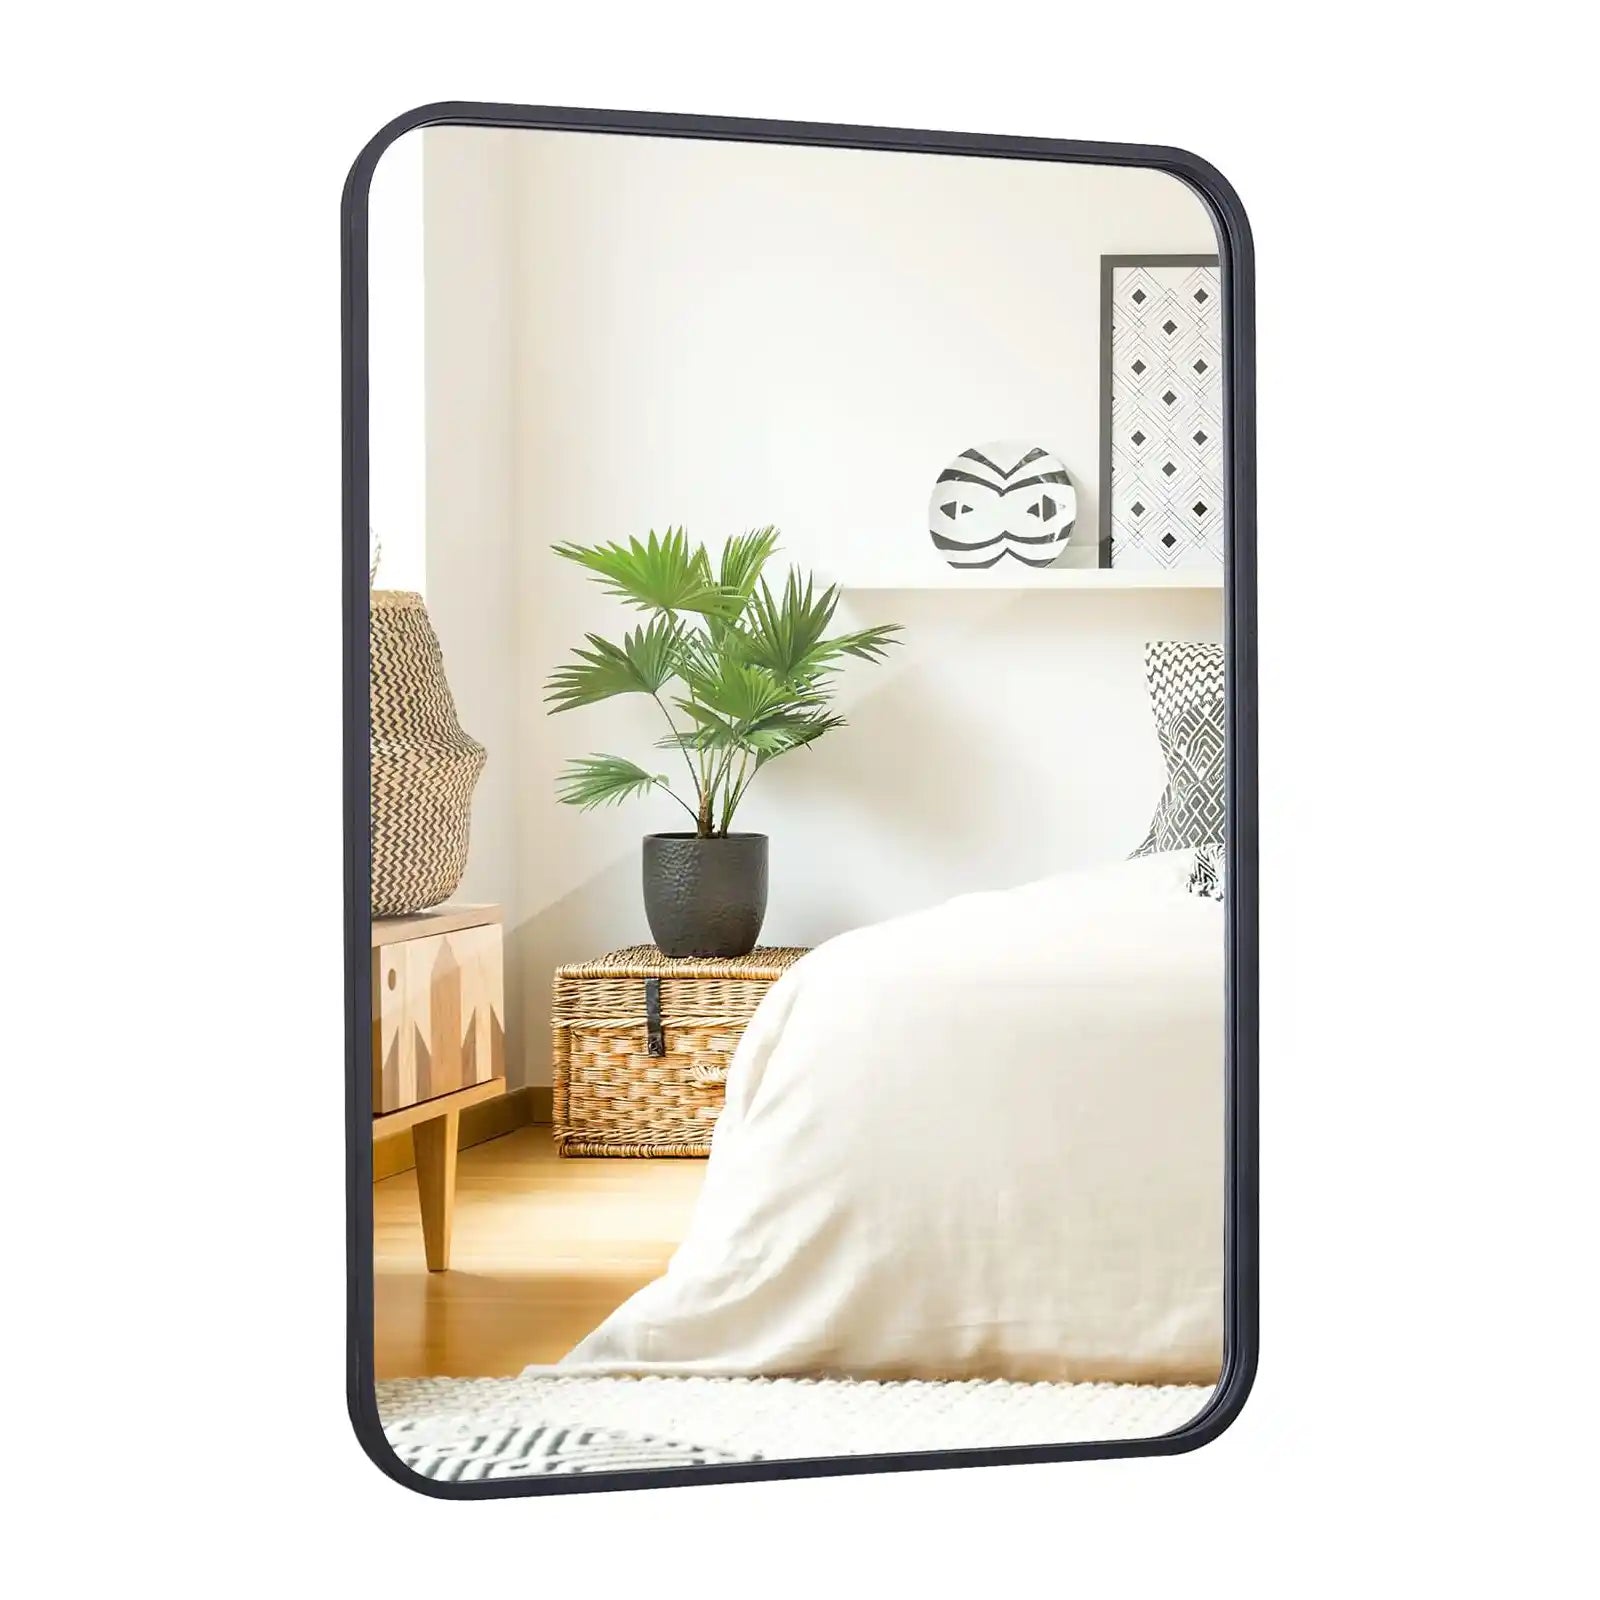 Black Metal Framed Rectangular Wall Mirror 22" x 30" Bathroom Mirror with Peaked Trim for Entryways, Bathrooms, Living Rooms